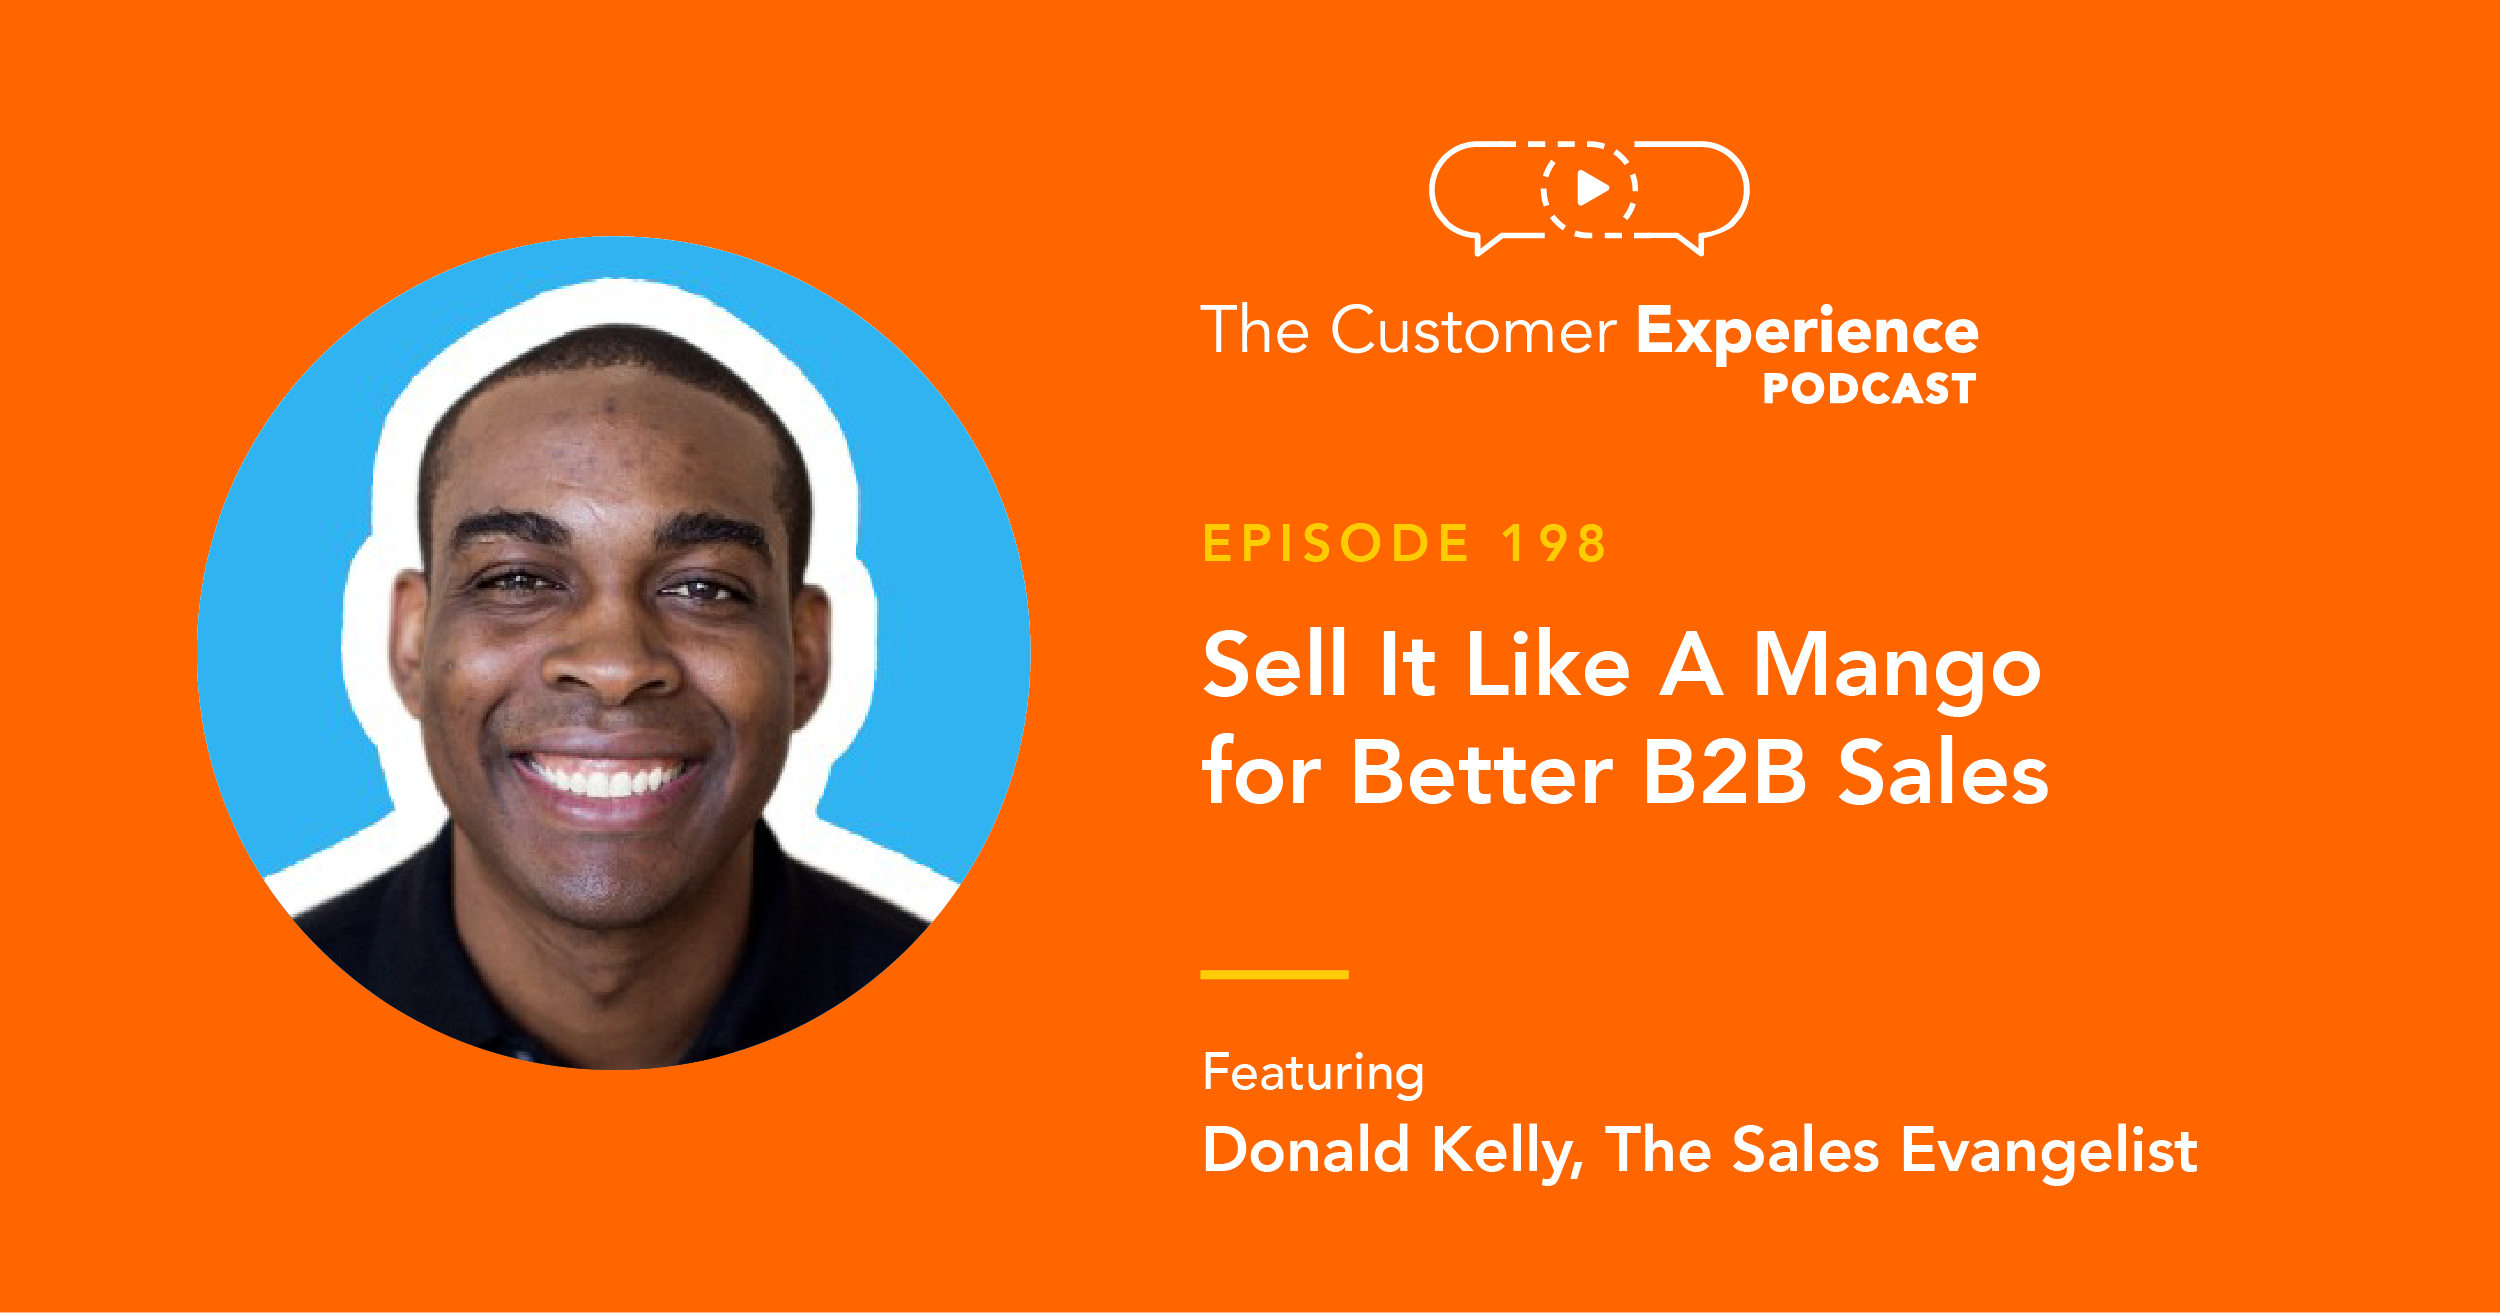 Donald Kelly, The Sales Evangelist, Sell It Like A Mango, The Customer Experience Podcast, sales evangelist, Donald C. Kelly, sales advice, sales insights, sales consistency, sales training, sales mindset